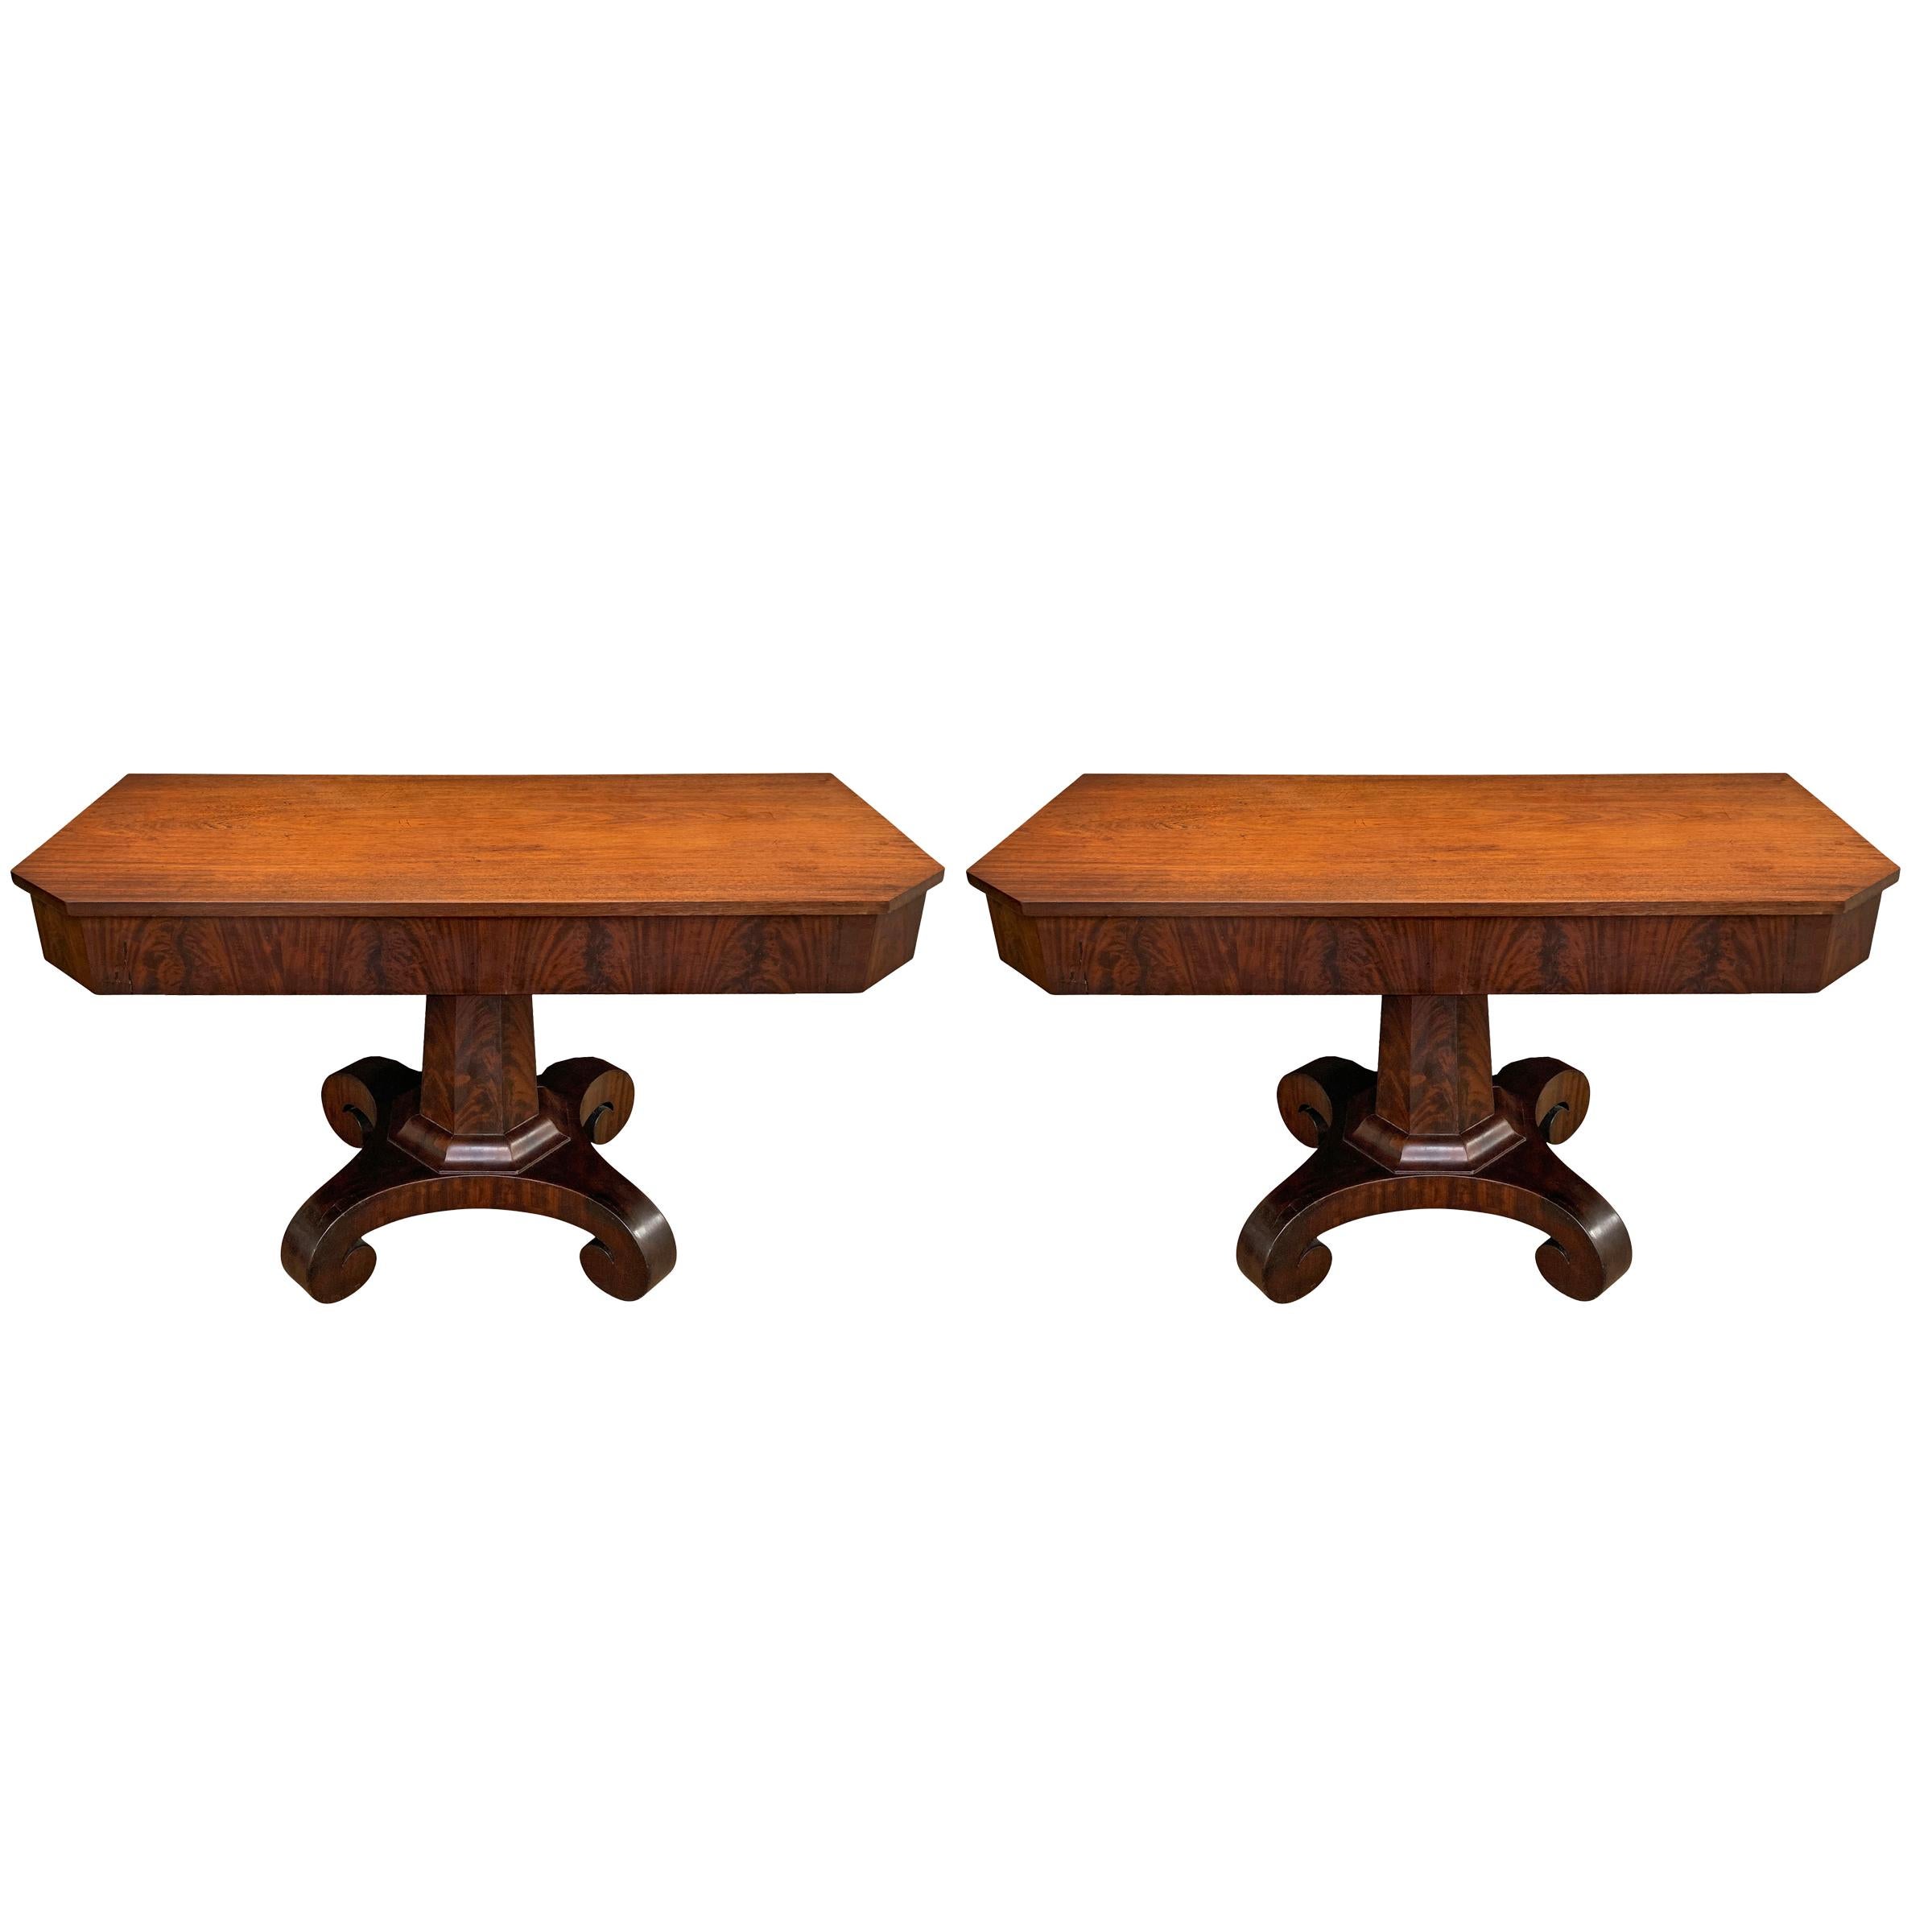 A gorgeous pair of early 19th century American Empire crotch mahogany veneer console tables with classical architectural details including tapered octagonal columns and hefty scrolled feet with their original casters, with tops made from solid